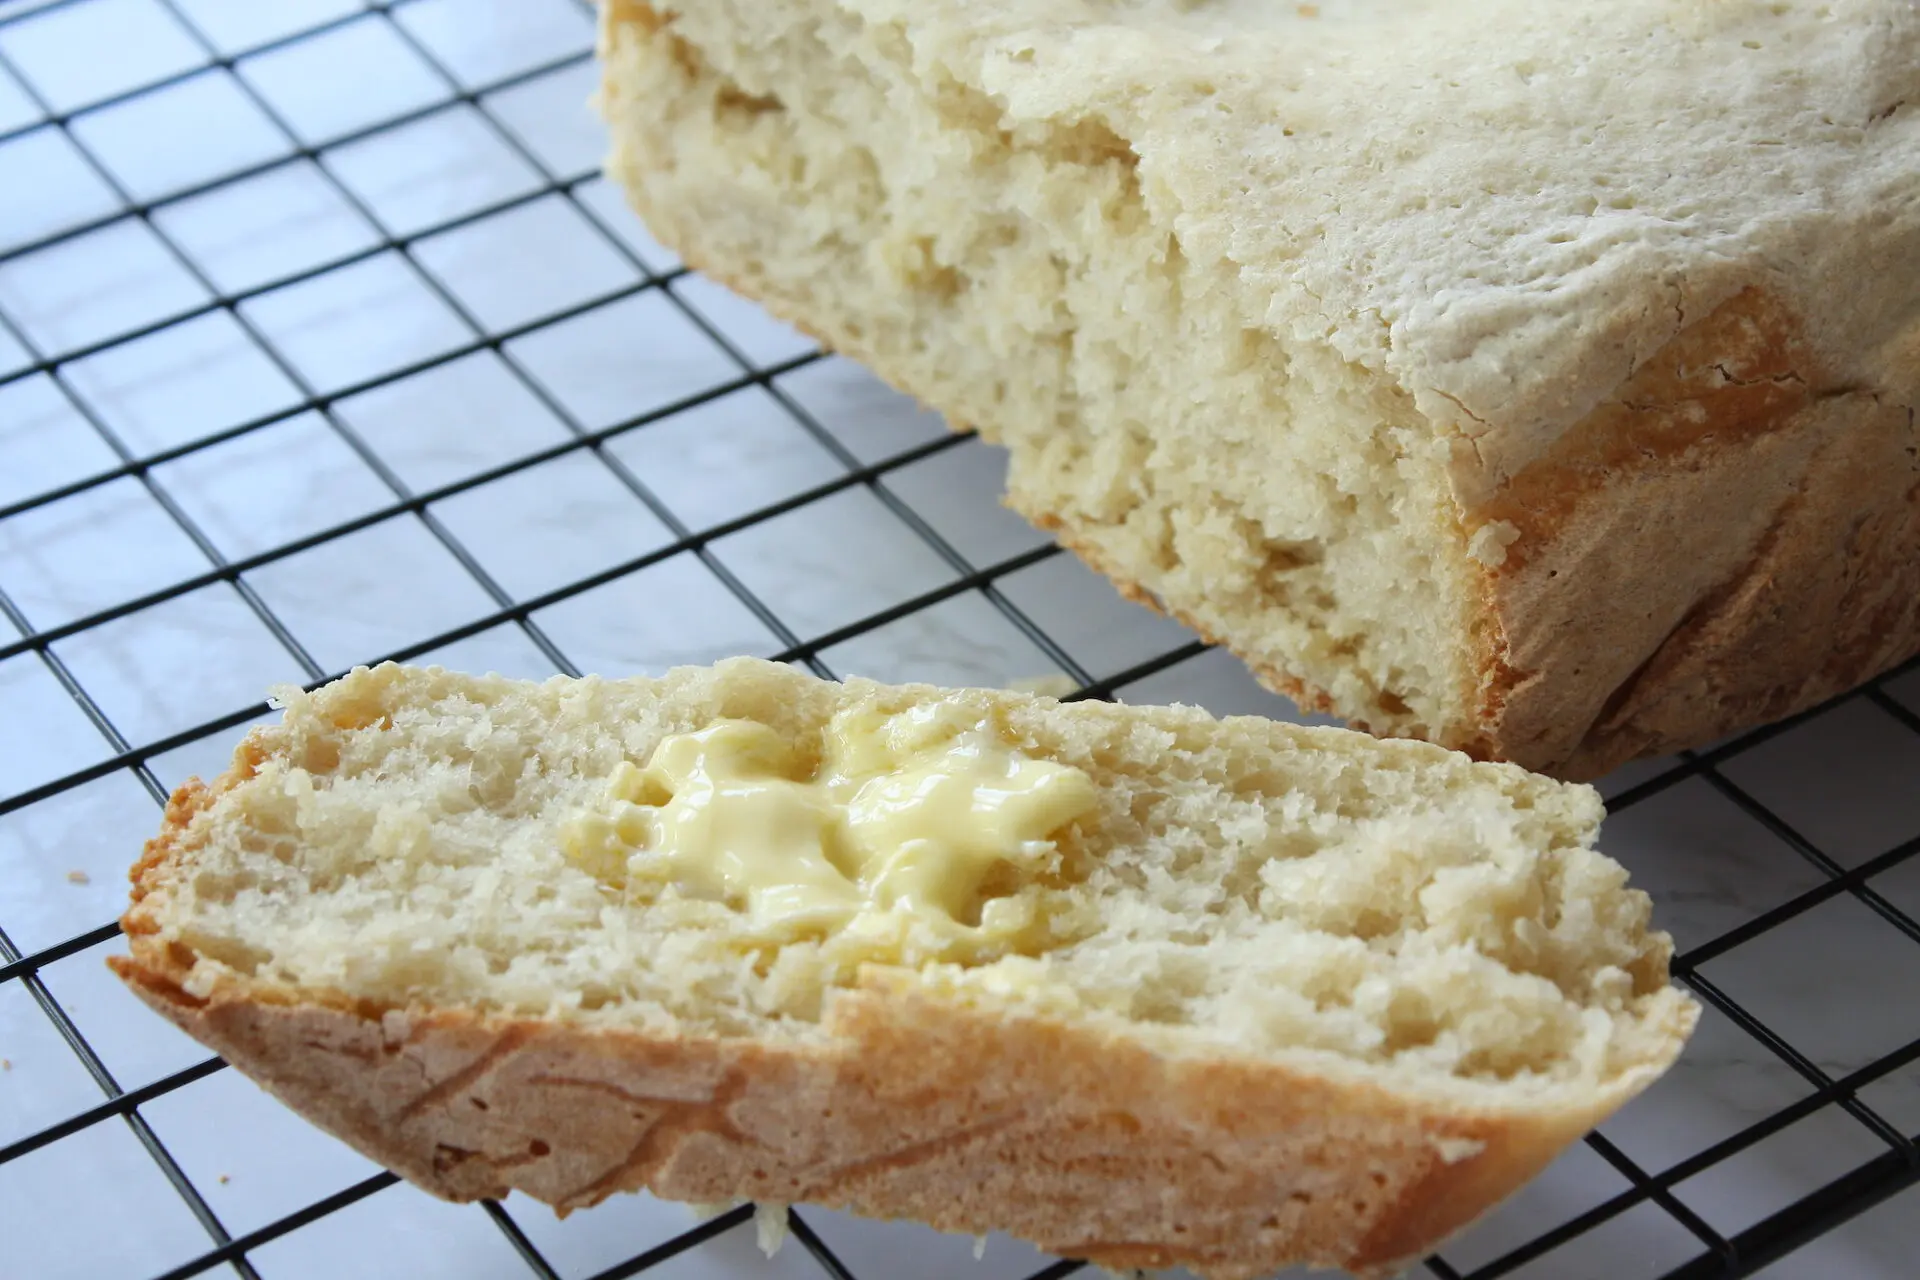 Slow cooker bread with slice and butter